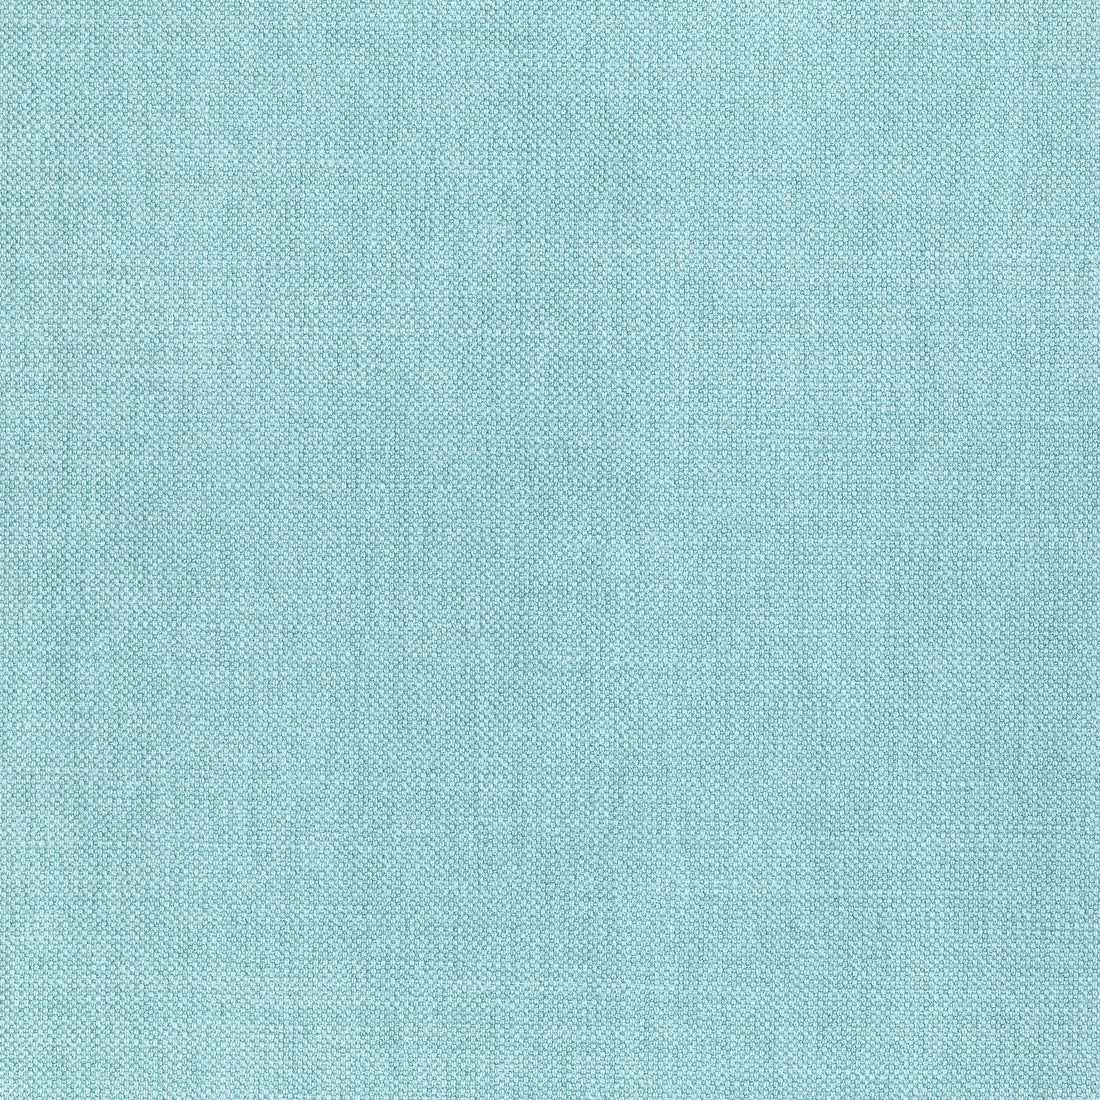 Prisma fabric in aqua color - pattern number W70151 - by Thibaut in the Woven Resource Vol 12 Prisma Fabrics collection